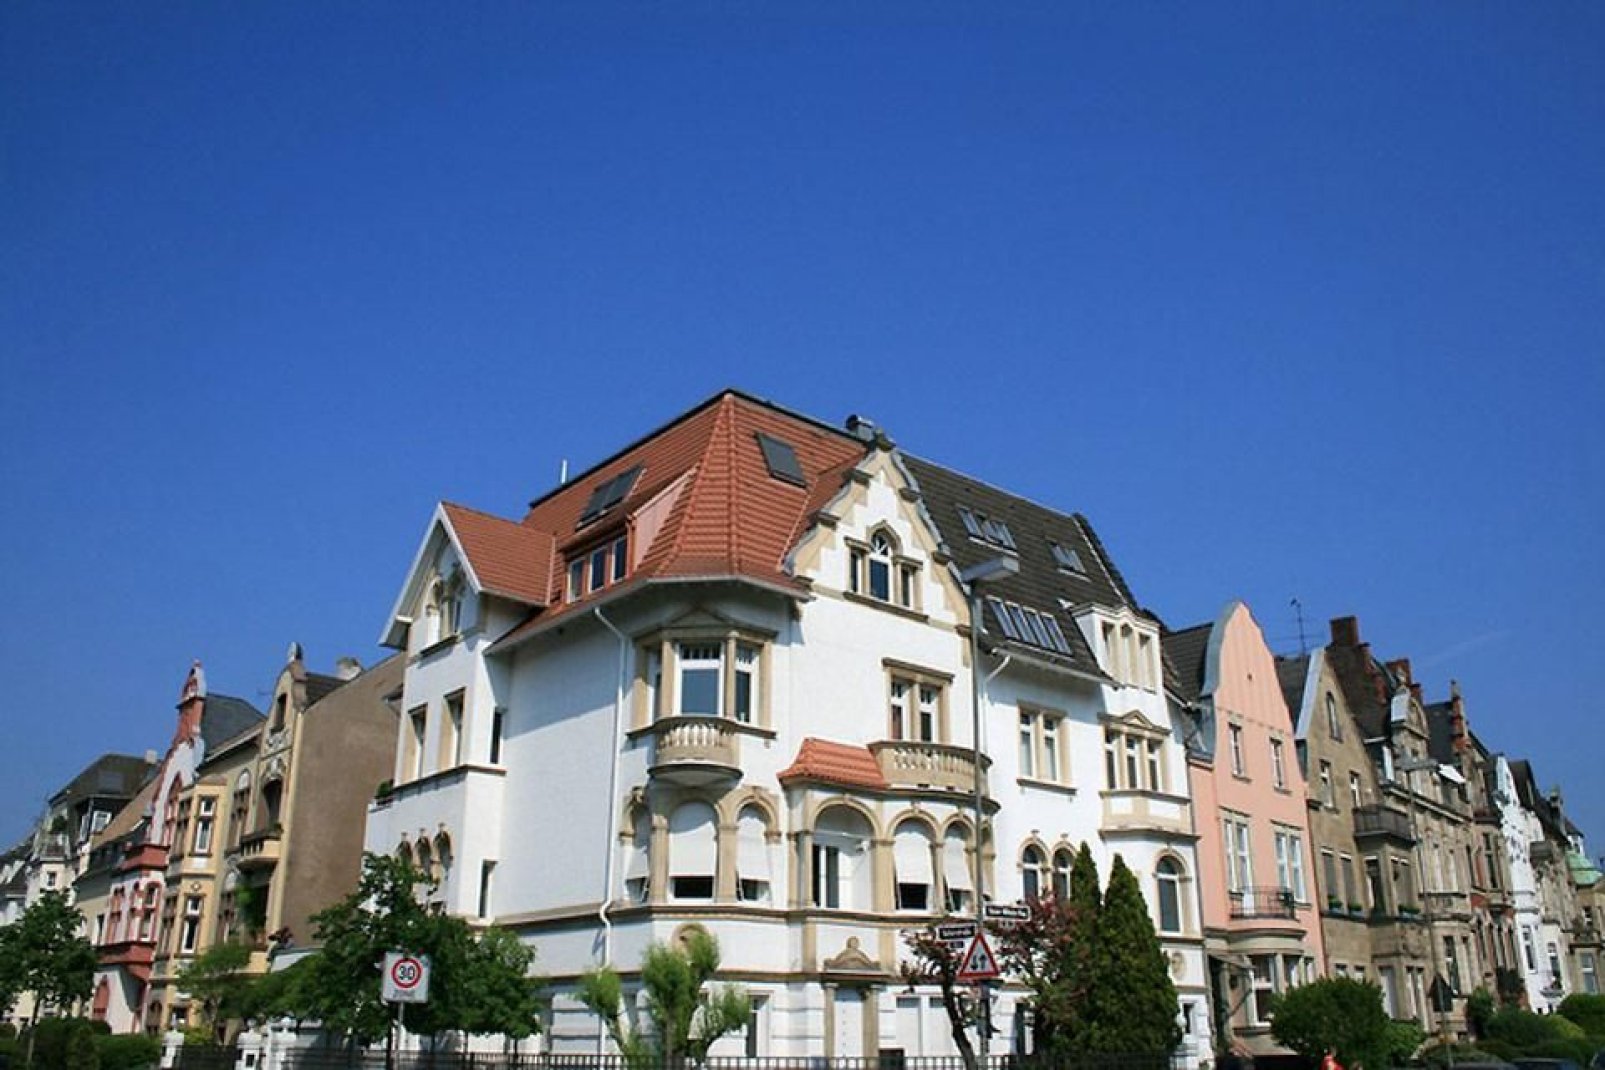 The architecture of the houses in Düsseldorf is stunning.